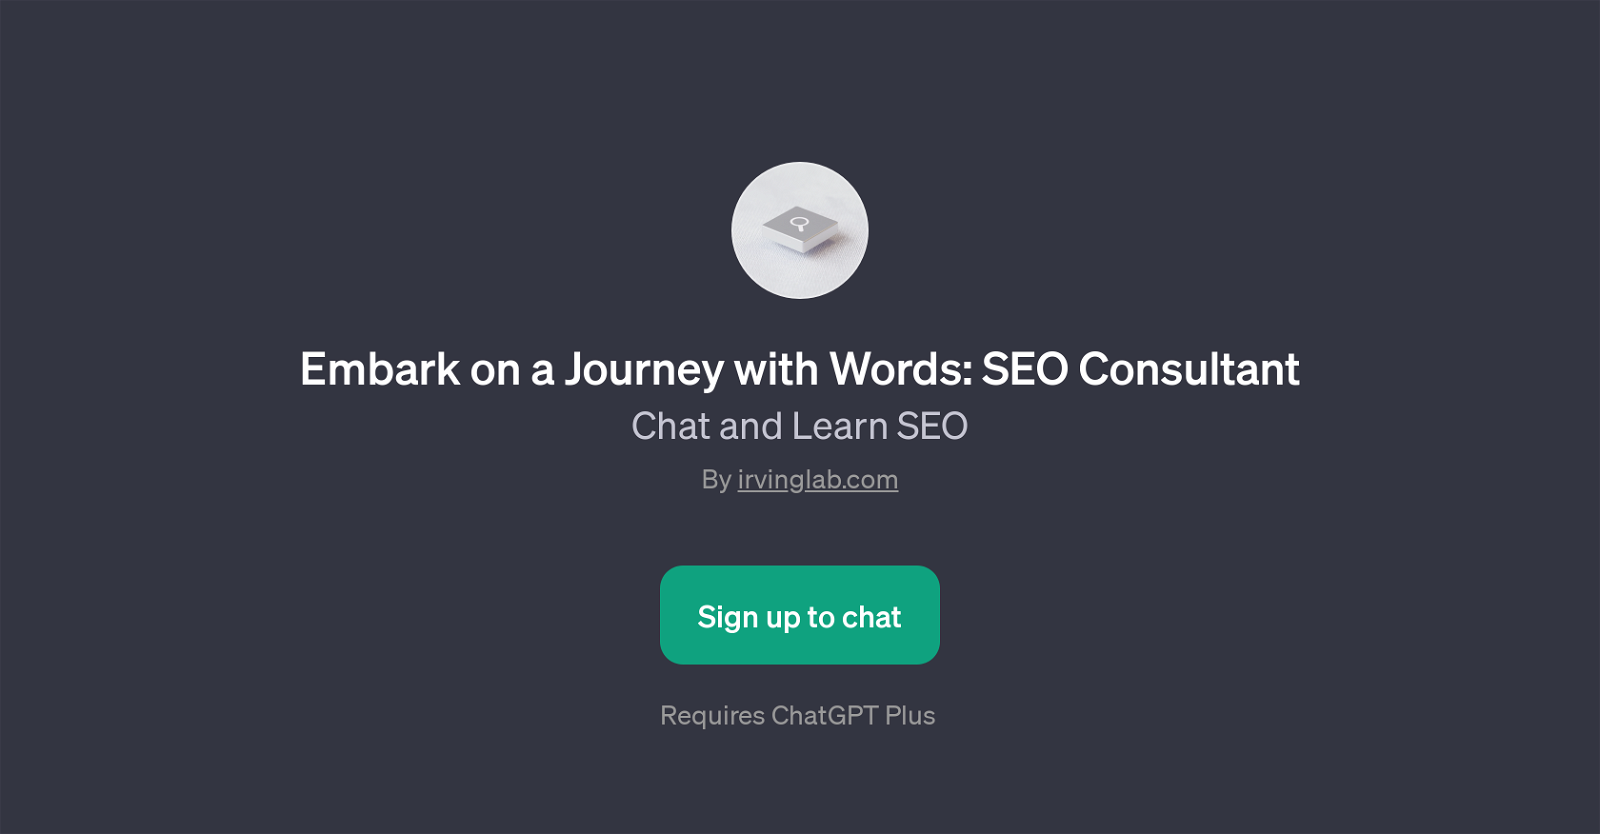 Embark on a Journey with Words: SEO Consultant website